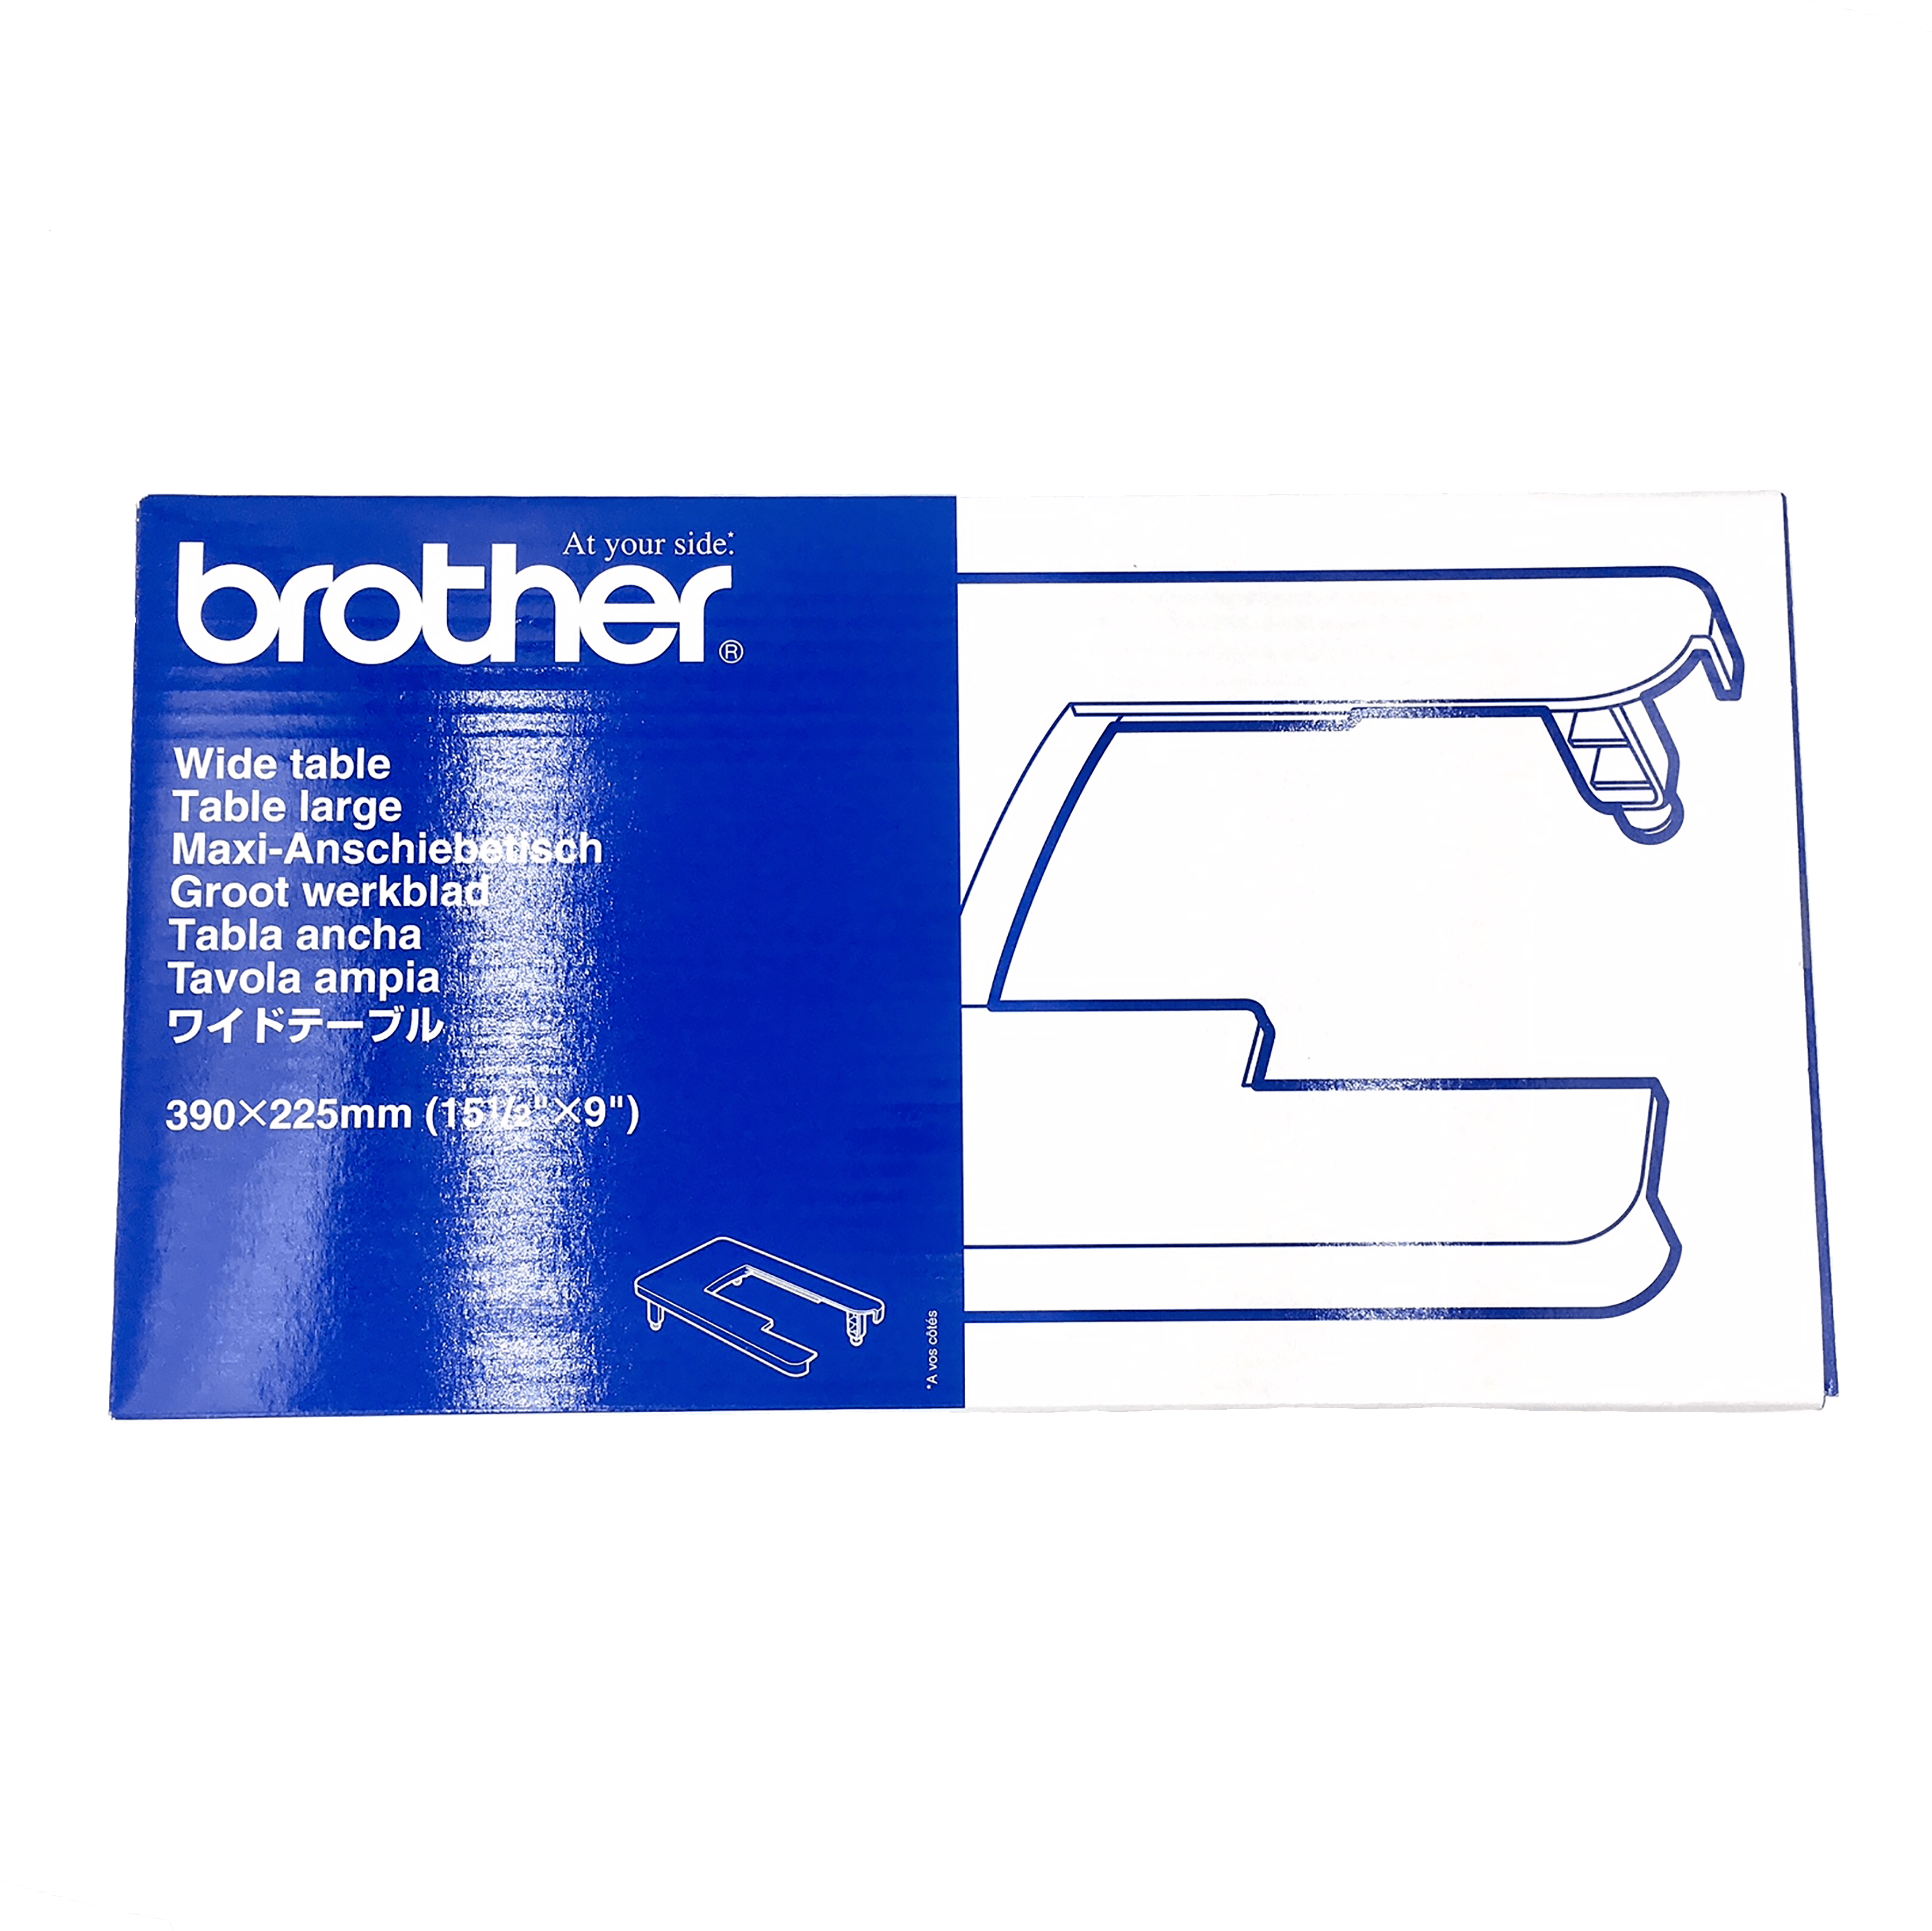 Brother Accessories - Fabric8